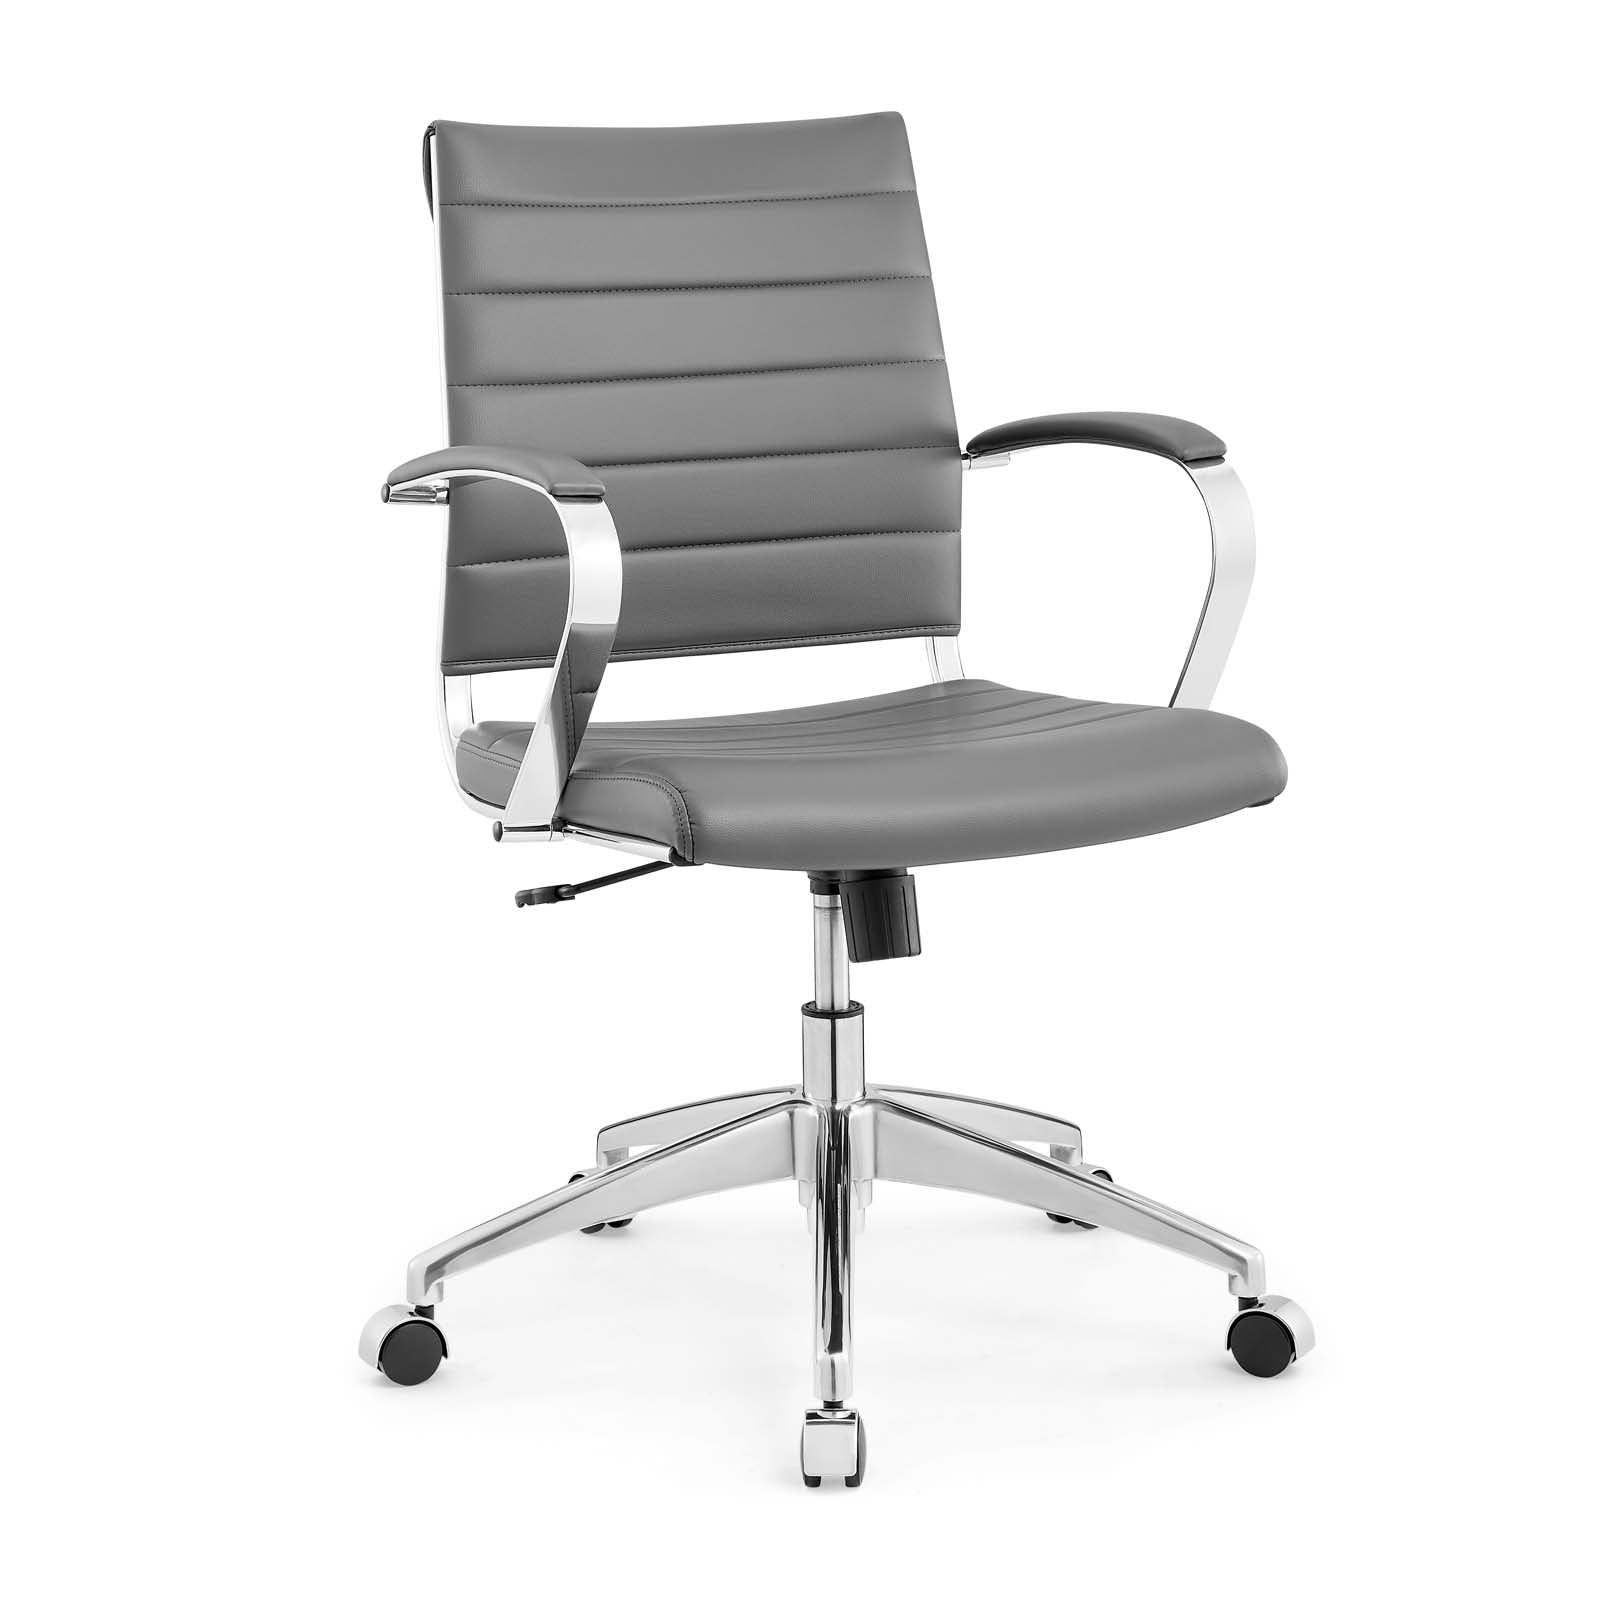 Buy Brown Jive Mid Back Office Chair at BUILDMyplace